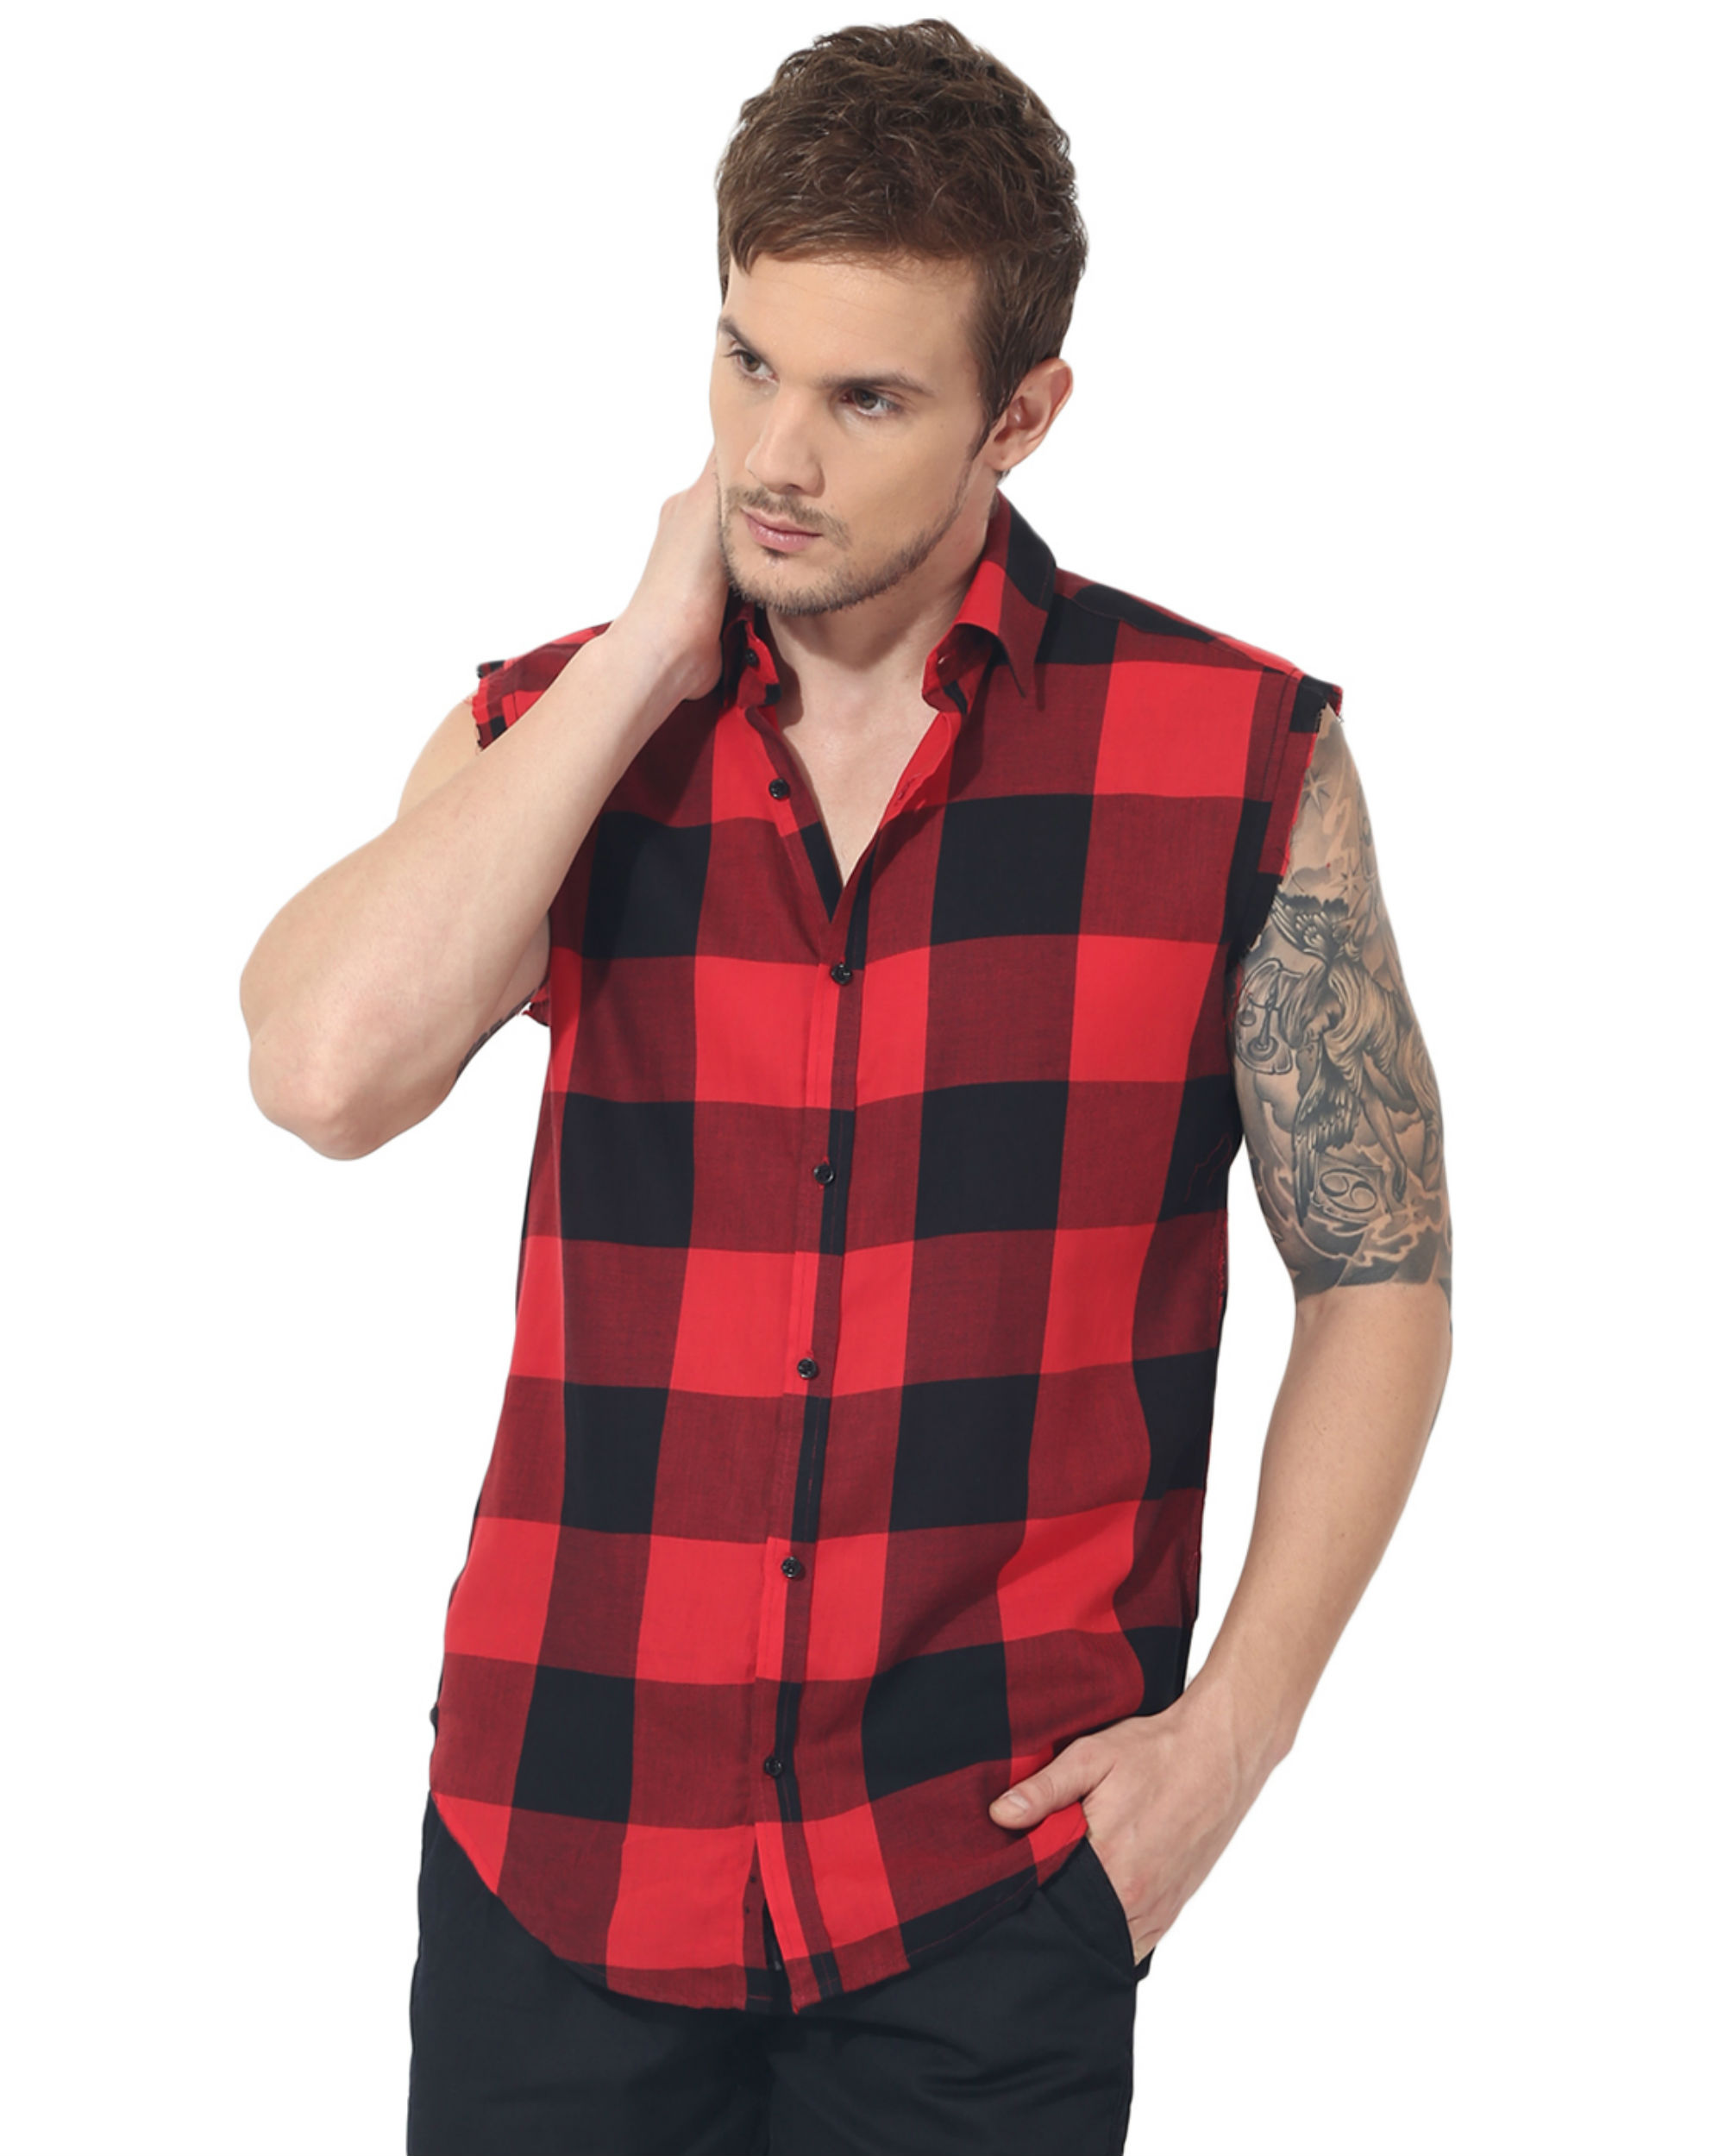 Black & red checks sleeveless casual shirt by Green Hill | The Secret Label